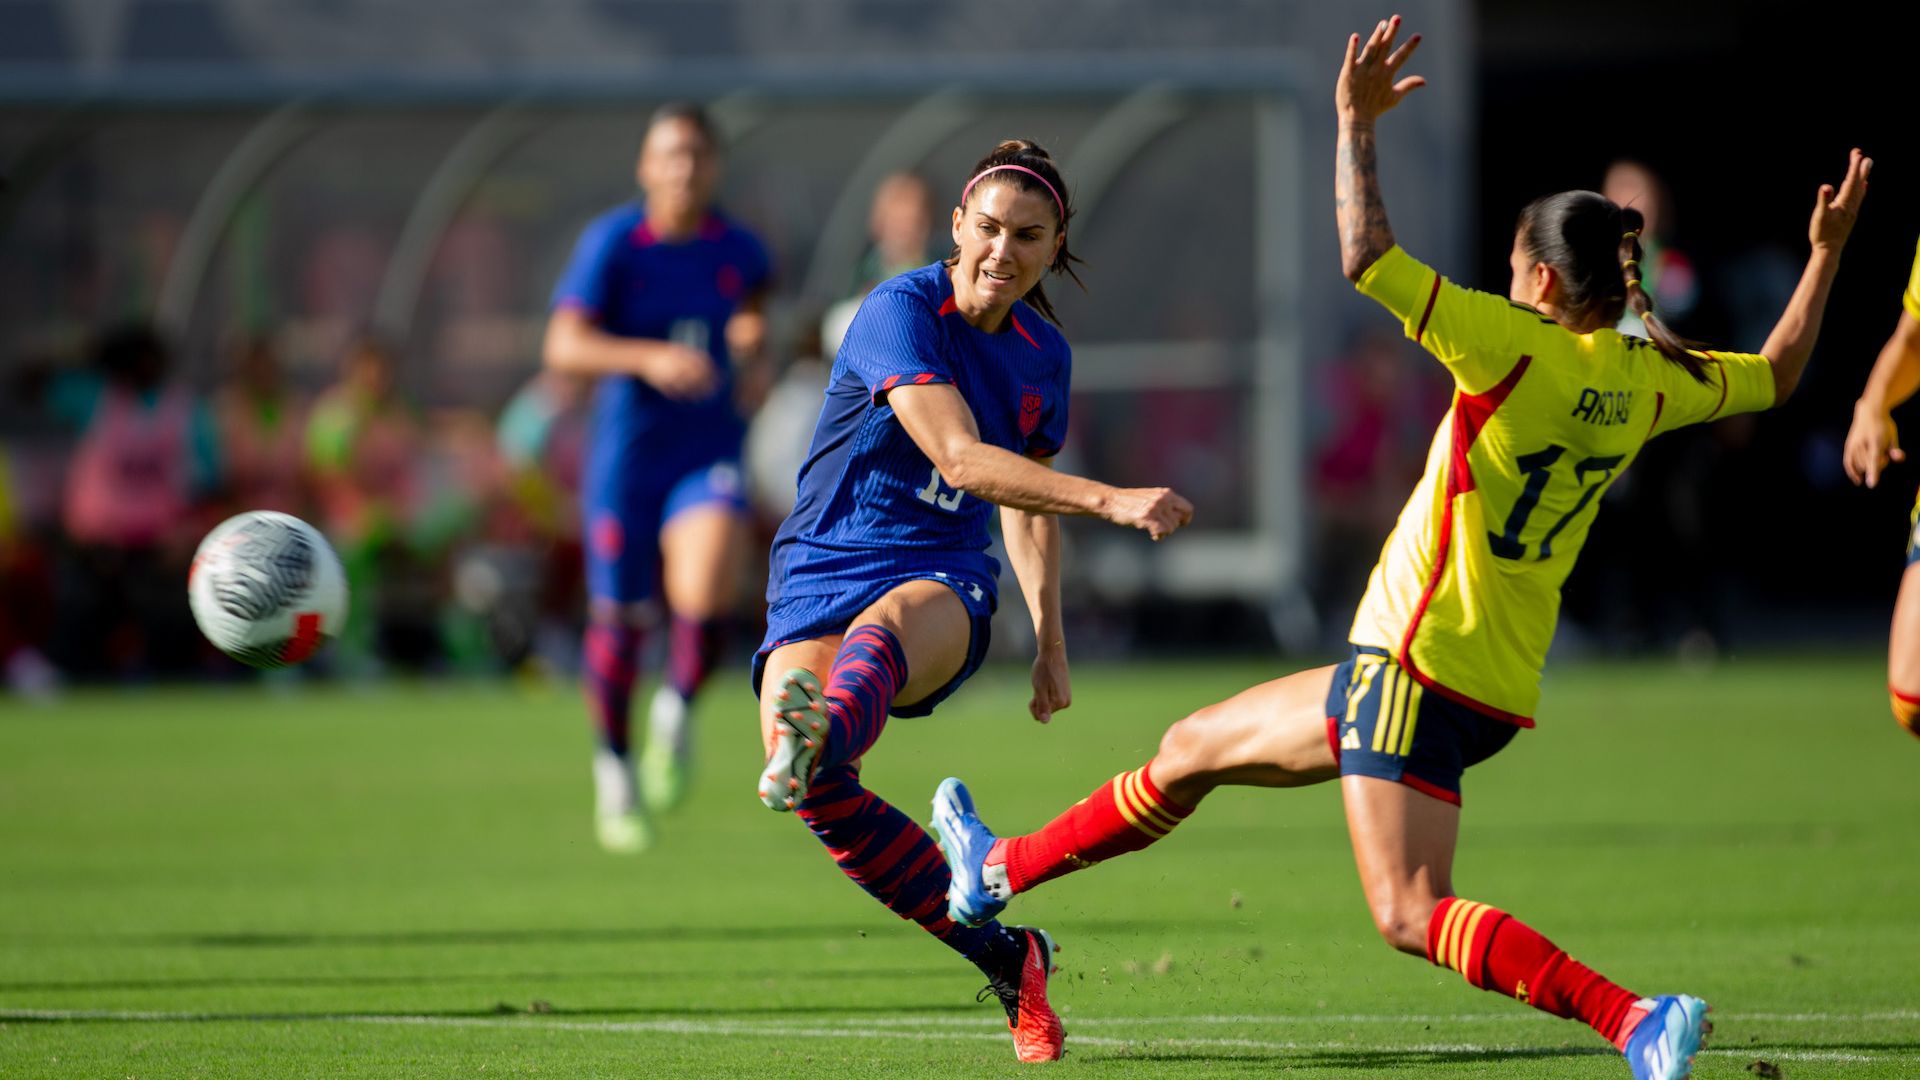 Soccer player Alex Morgan takes a shot past a defender in a game. 